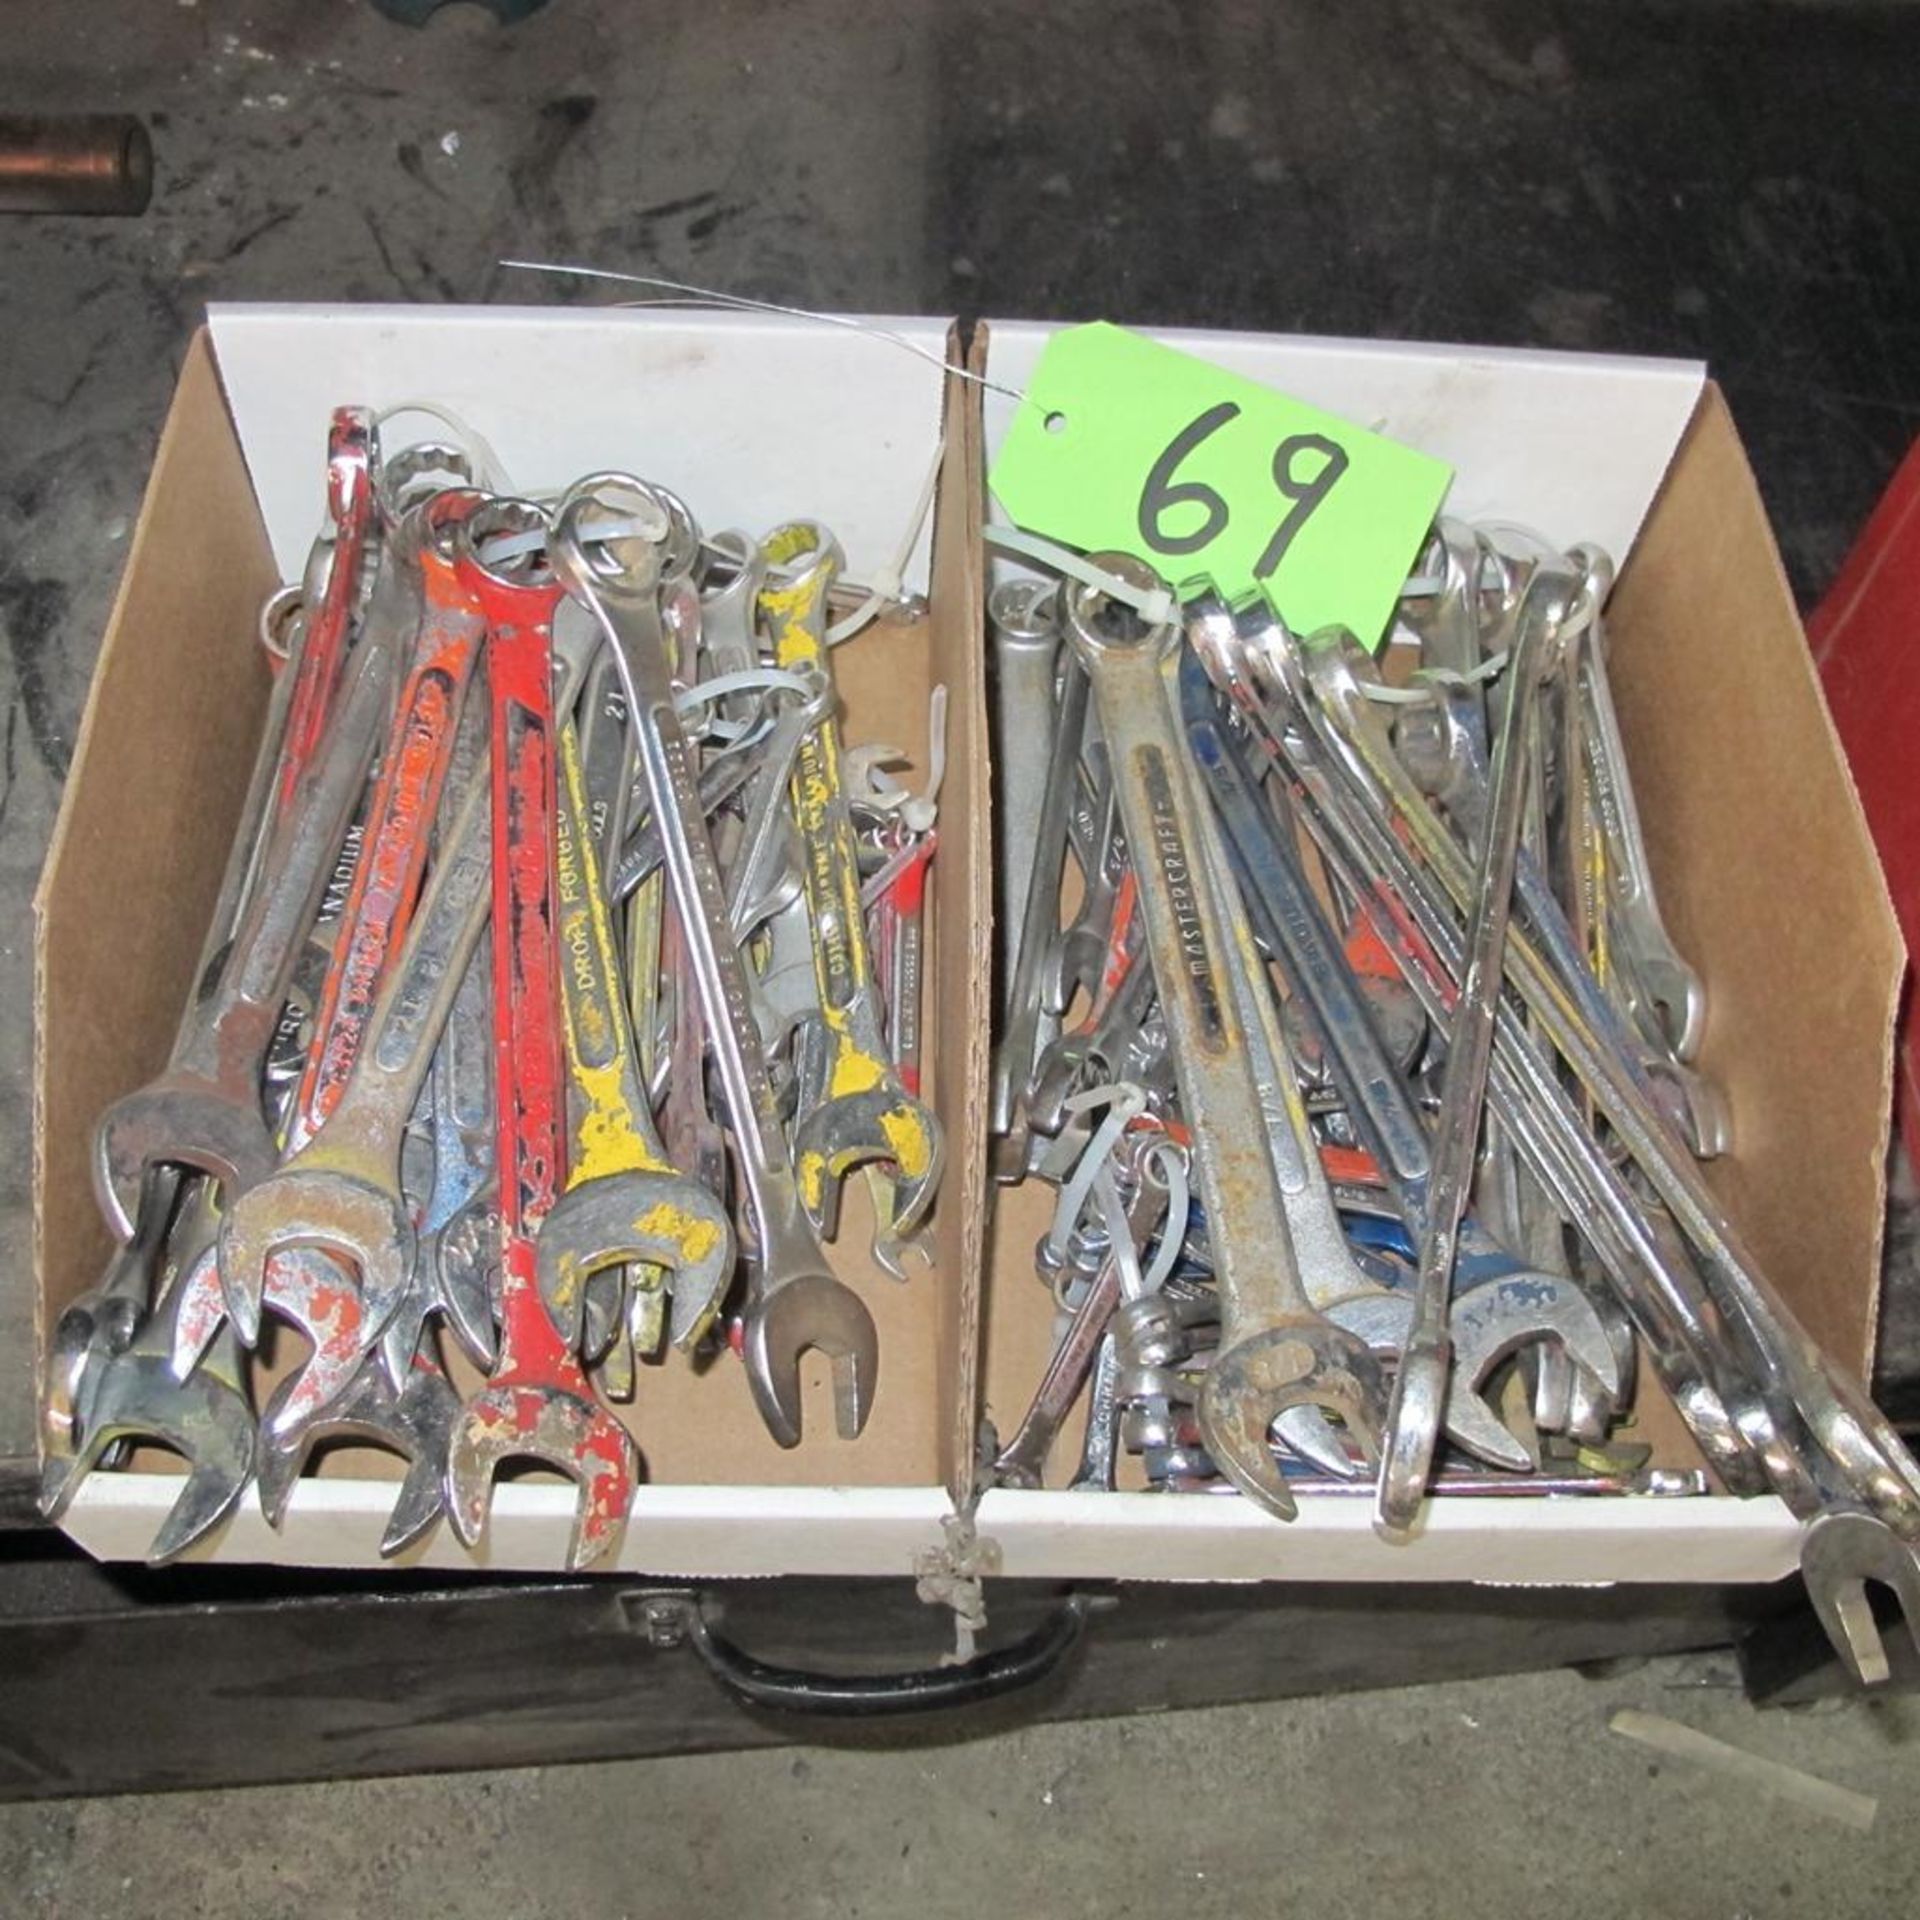 LOT OF 2 BOXES OF HAND WRENCHES (IN WEST BLDG)